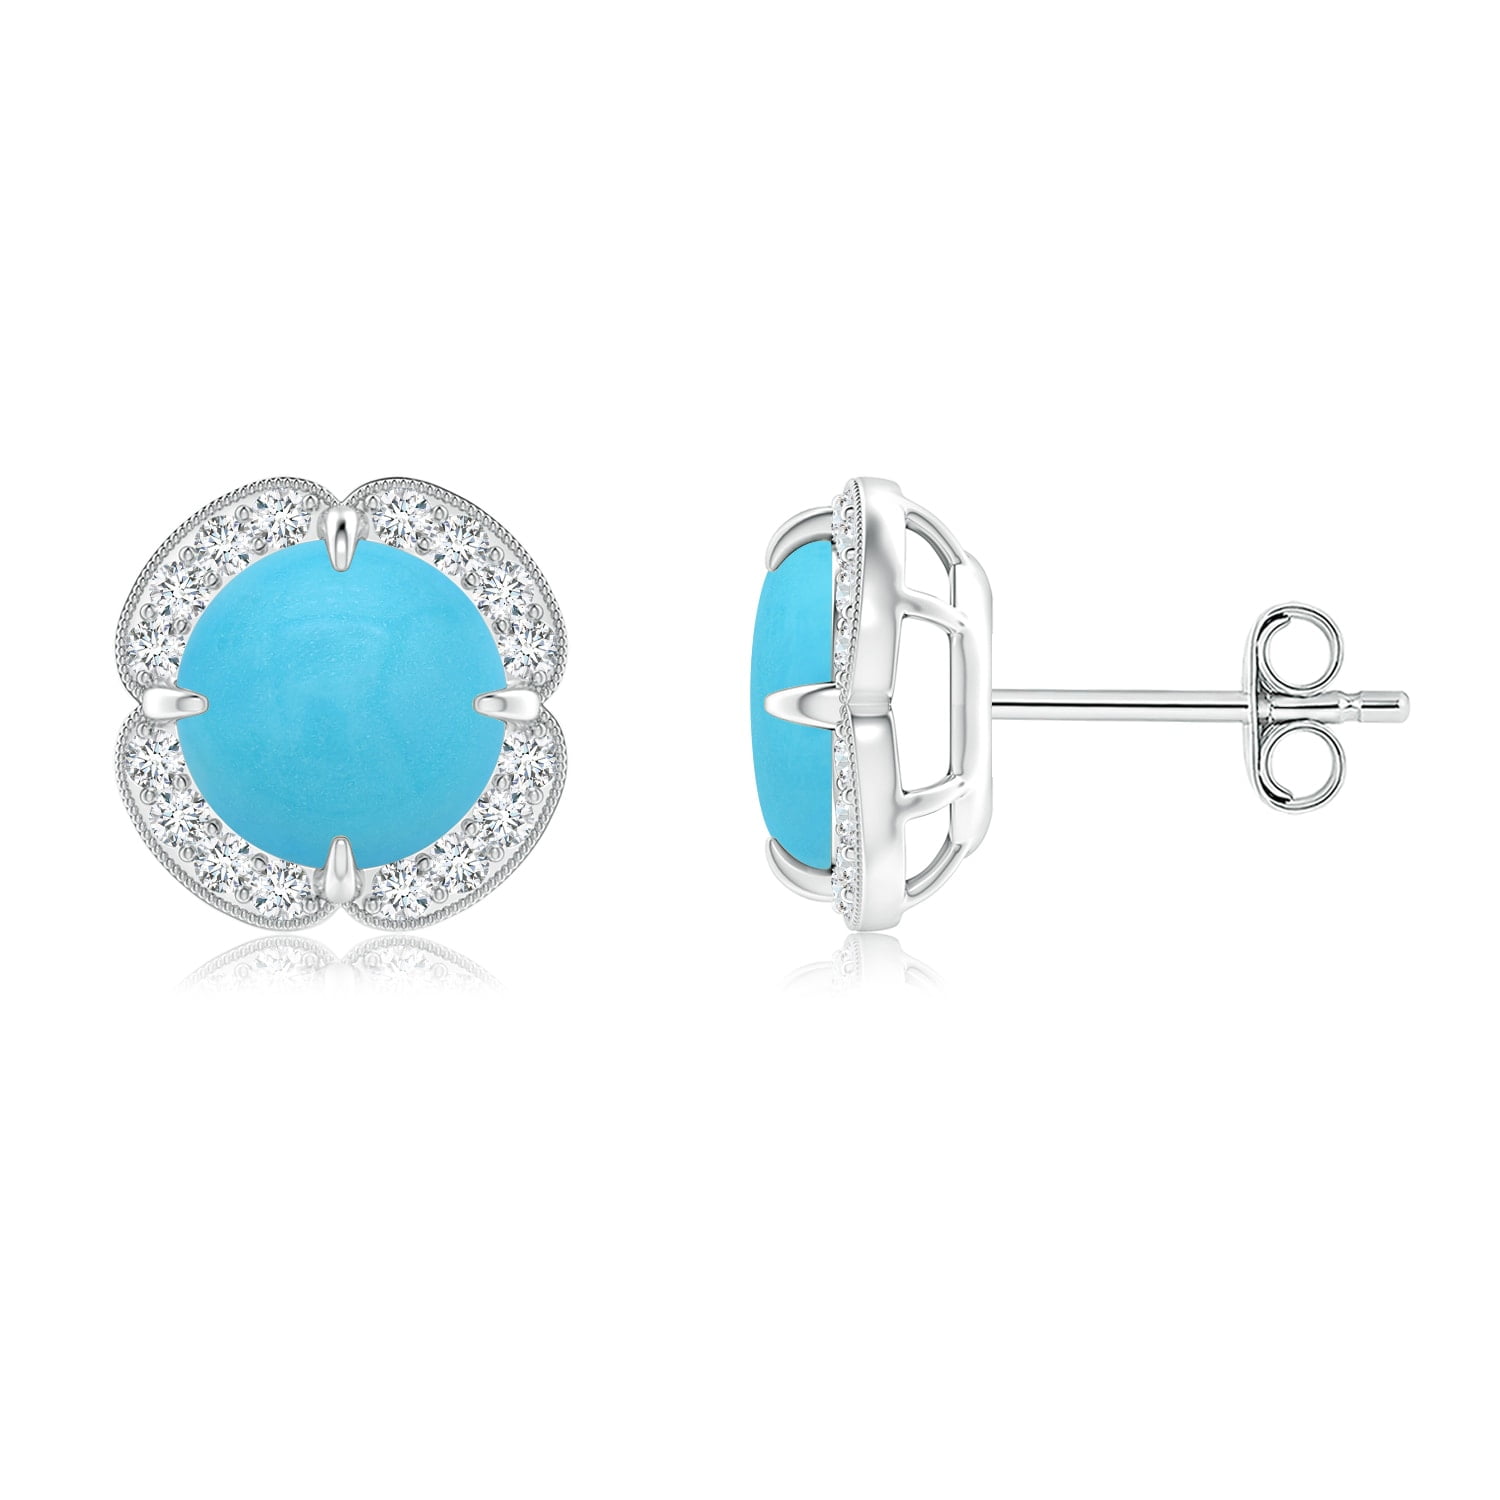 Claw-Set Turquoise Clover Stud Earrings (7mm Turquoise) - SE1020TQD-SL-AA-7